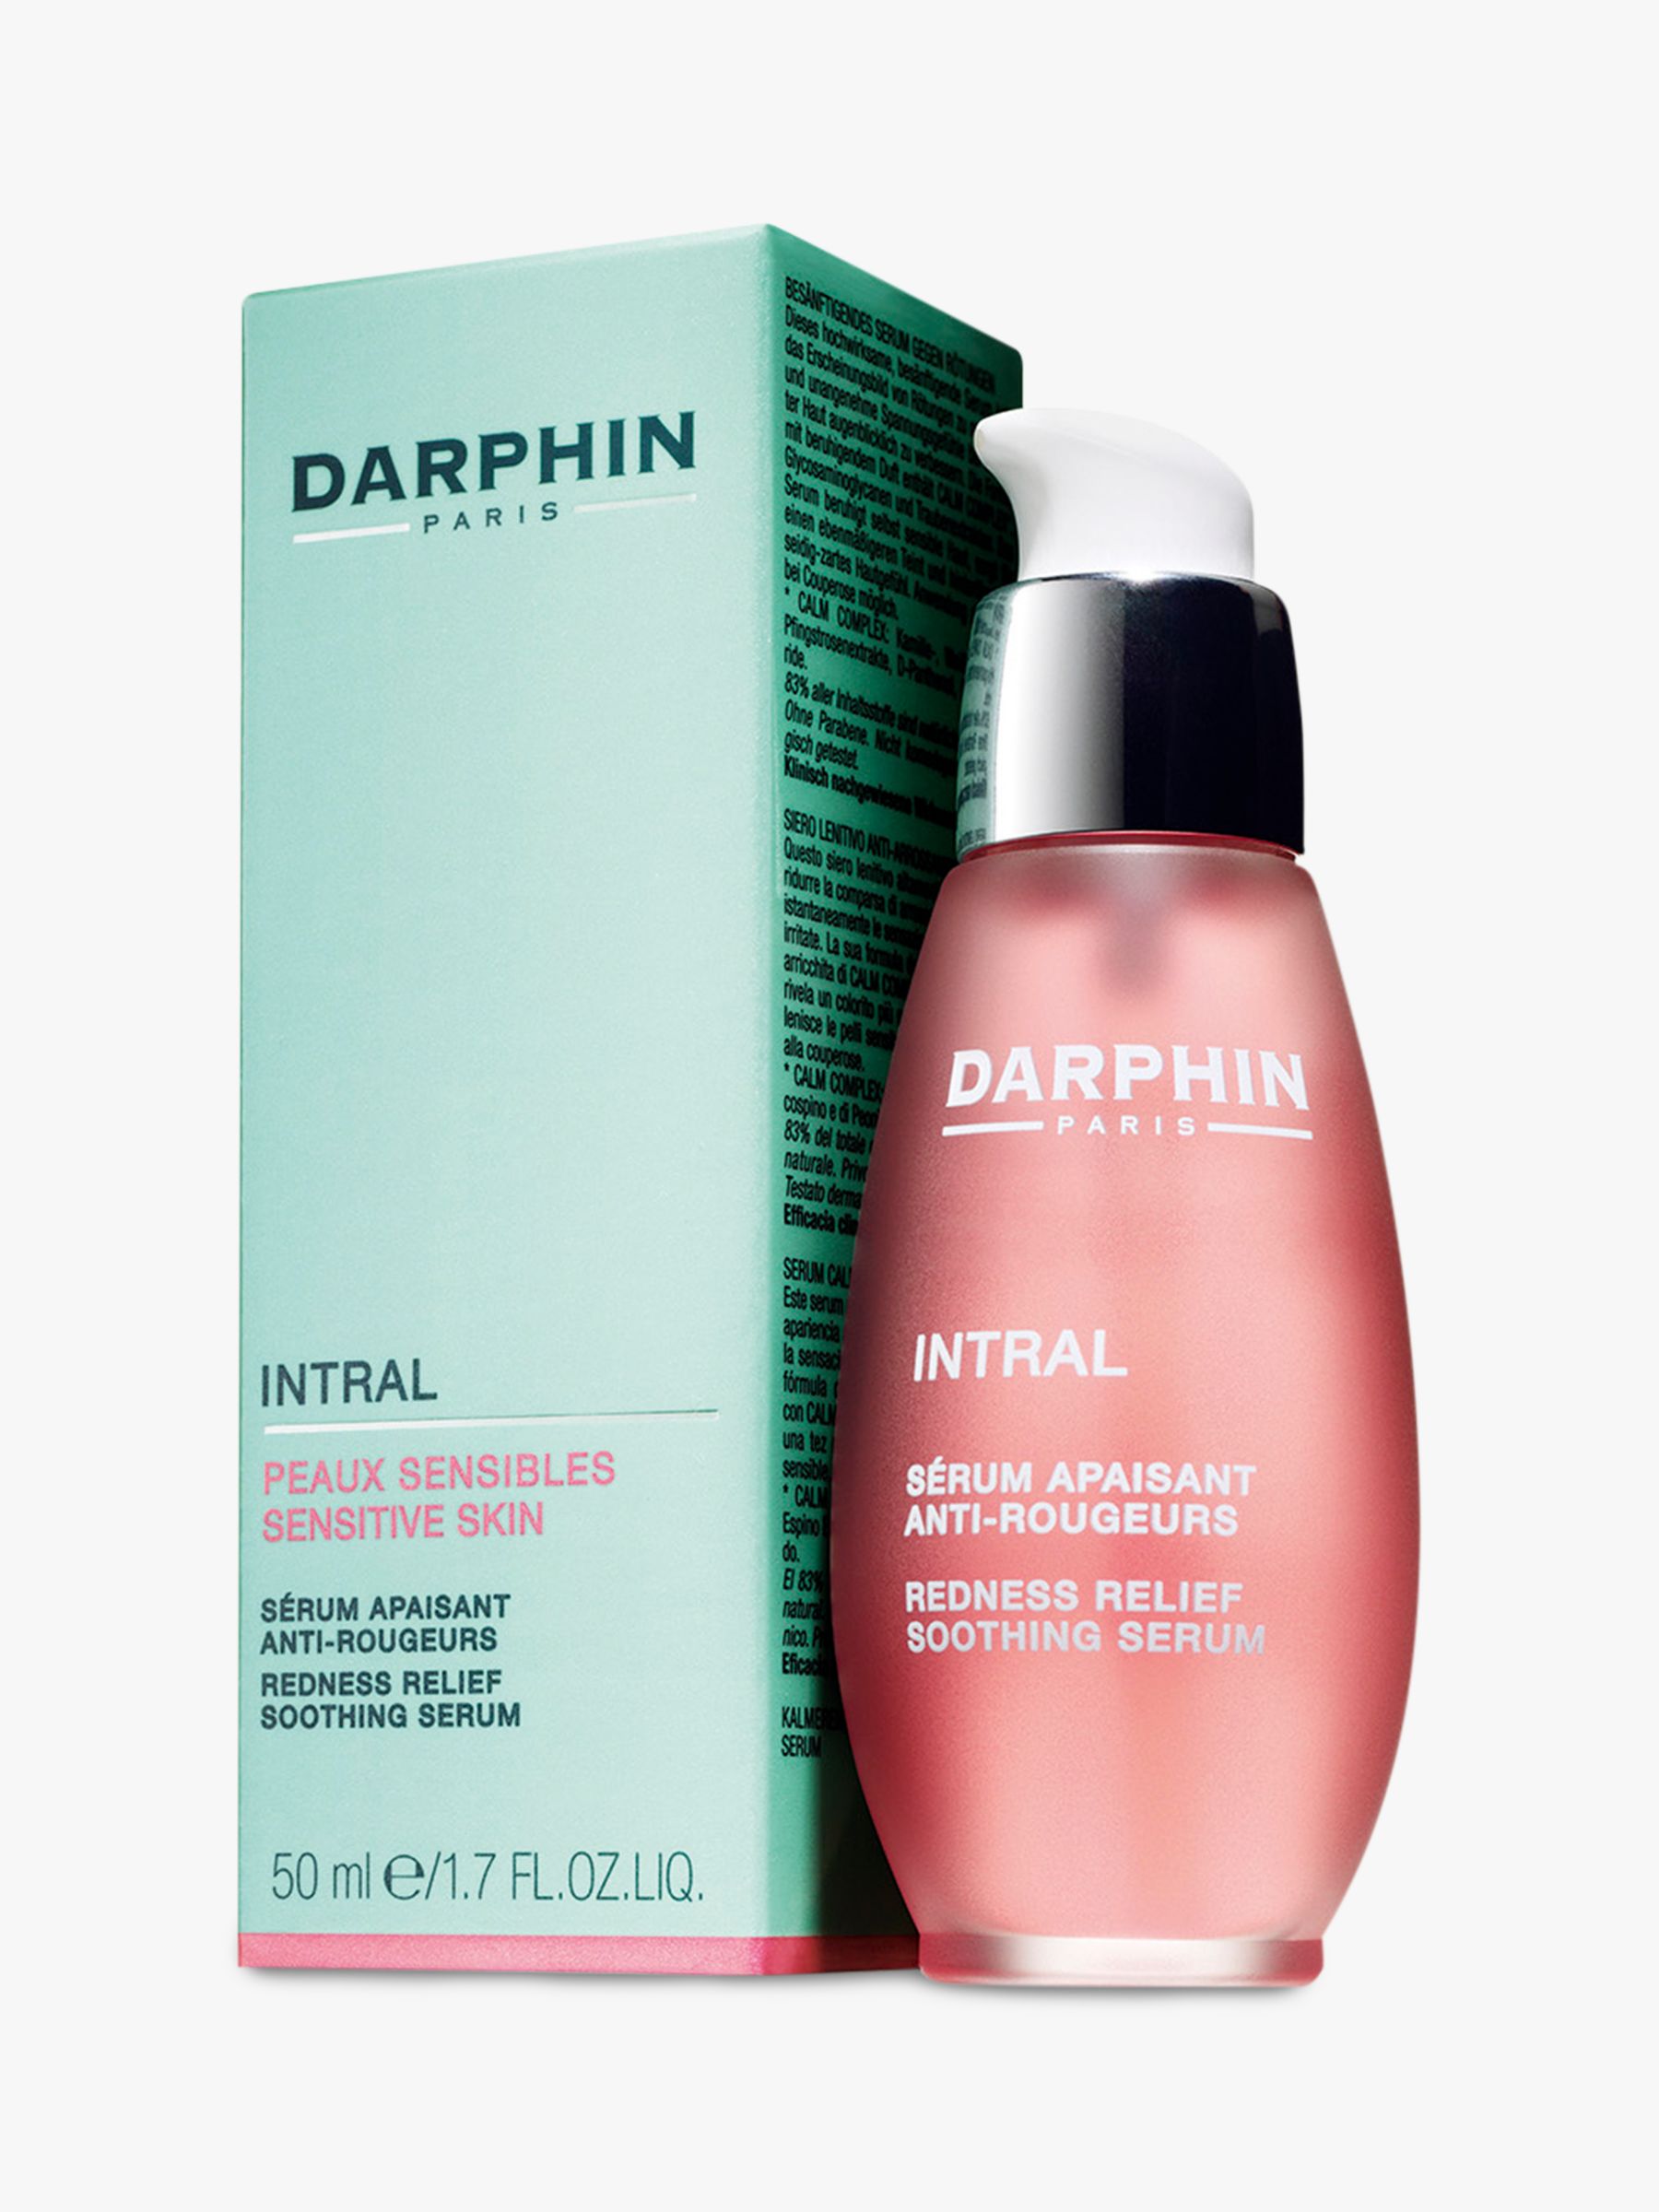 Darphin Intral Redness Relief Soothing Serum, 50ml at John Lewis & Partners